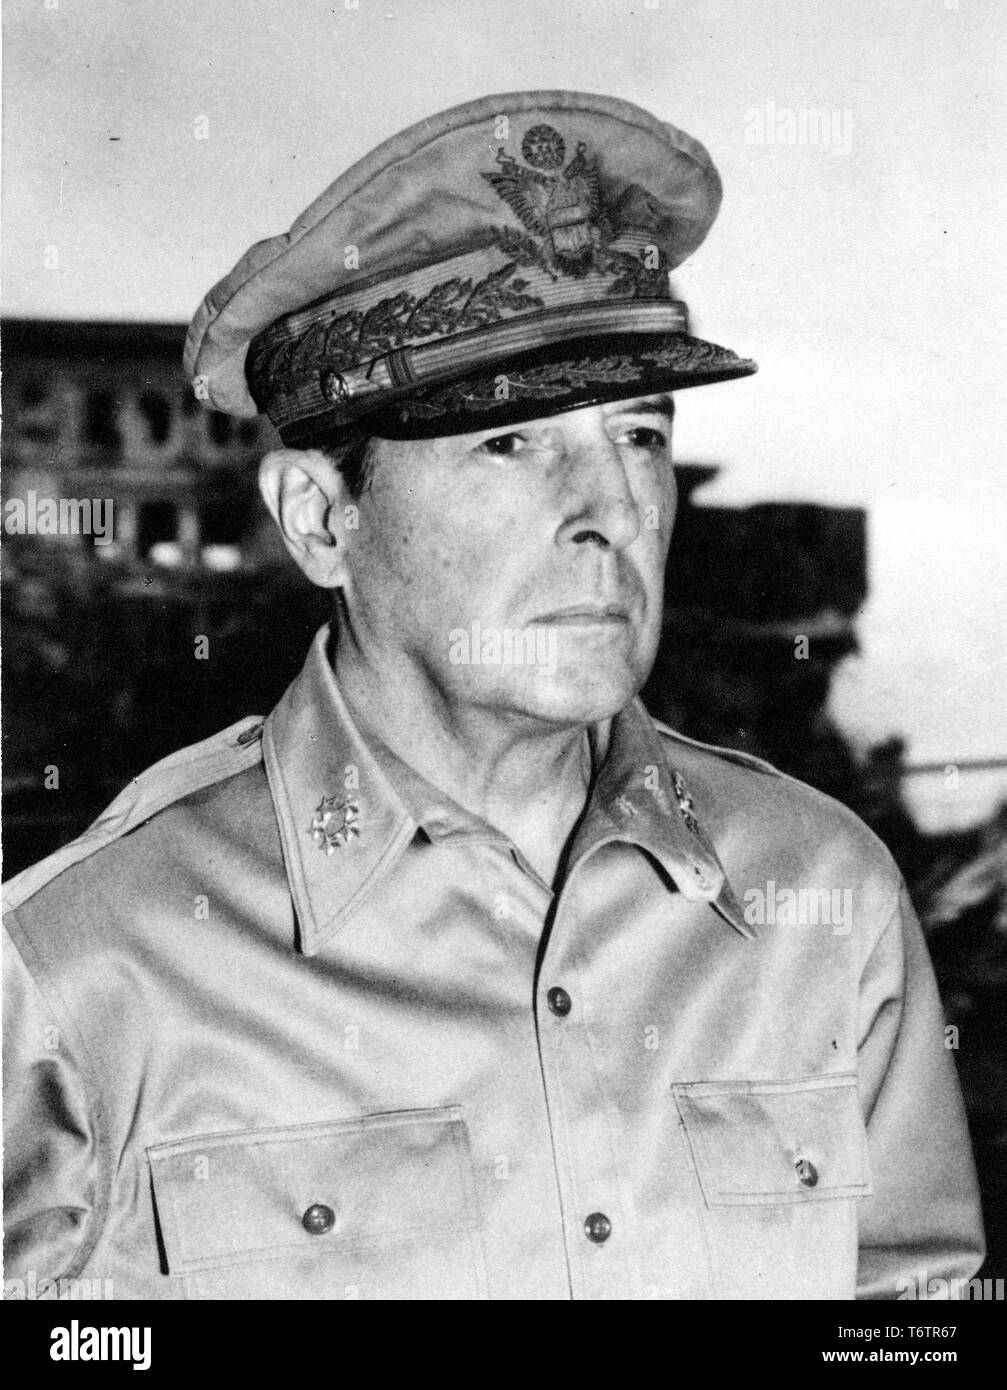 Close-up, from the chest up, of General Douglas MacArthur wearing his Field Marshal of the Philippines uniform and cap and a serious expression on his face, 1945. Image courtesy National Archives. () Stock Photo